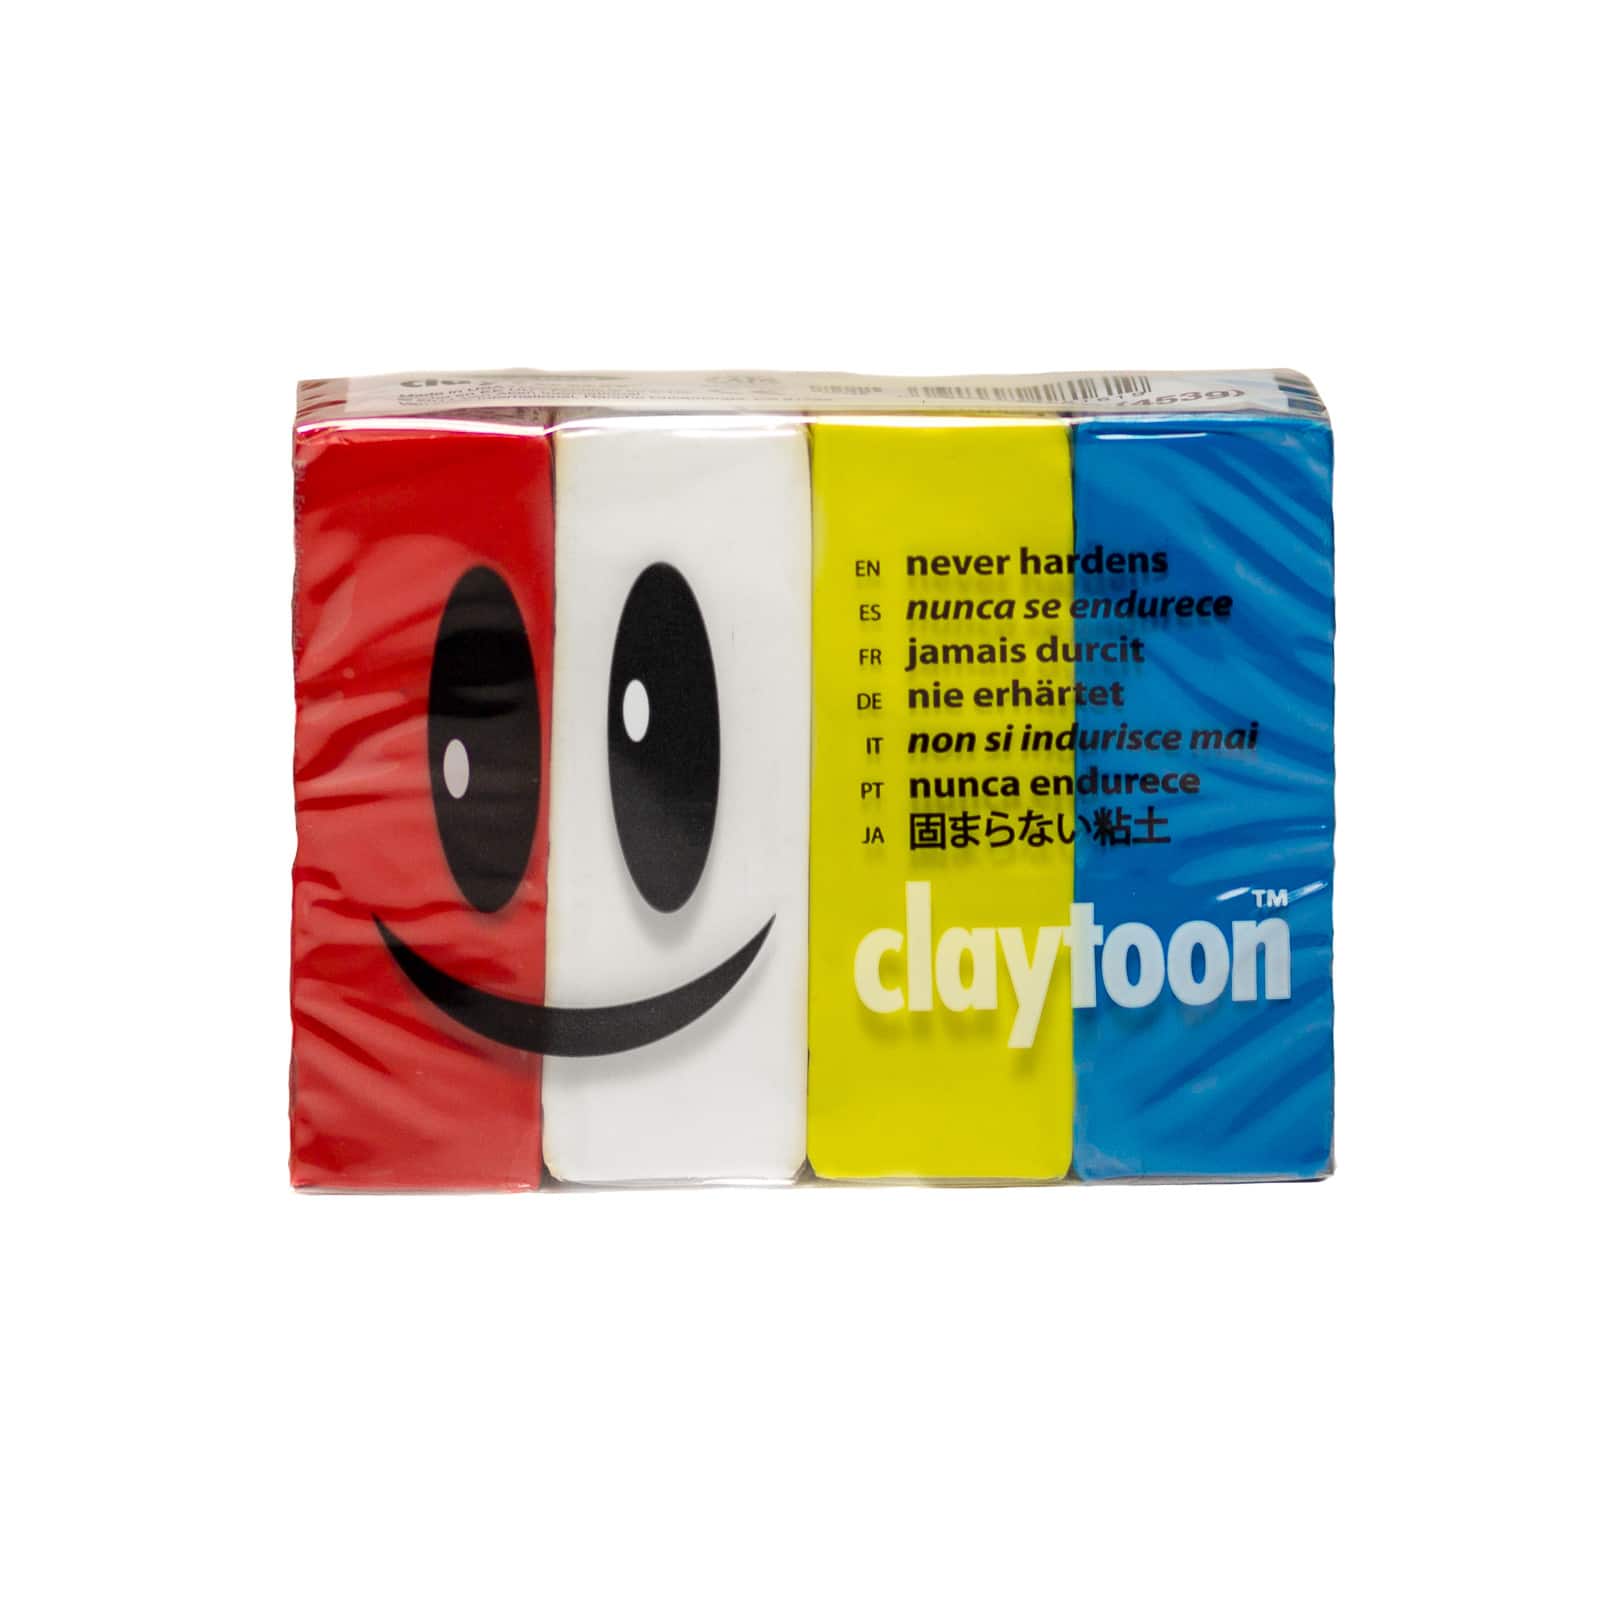 1lb. Plastalina Modeling Clay by Craft Smart®